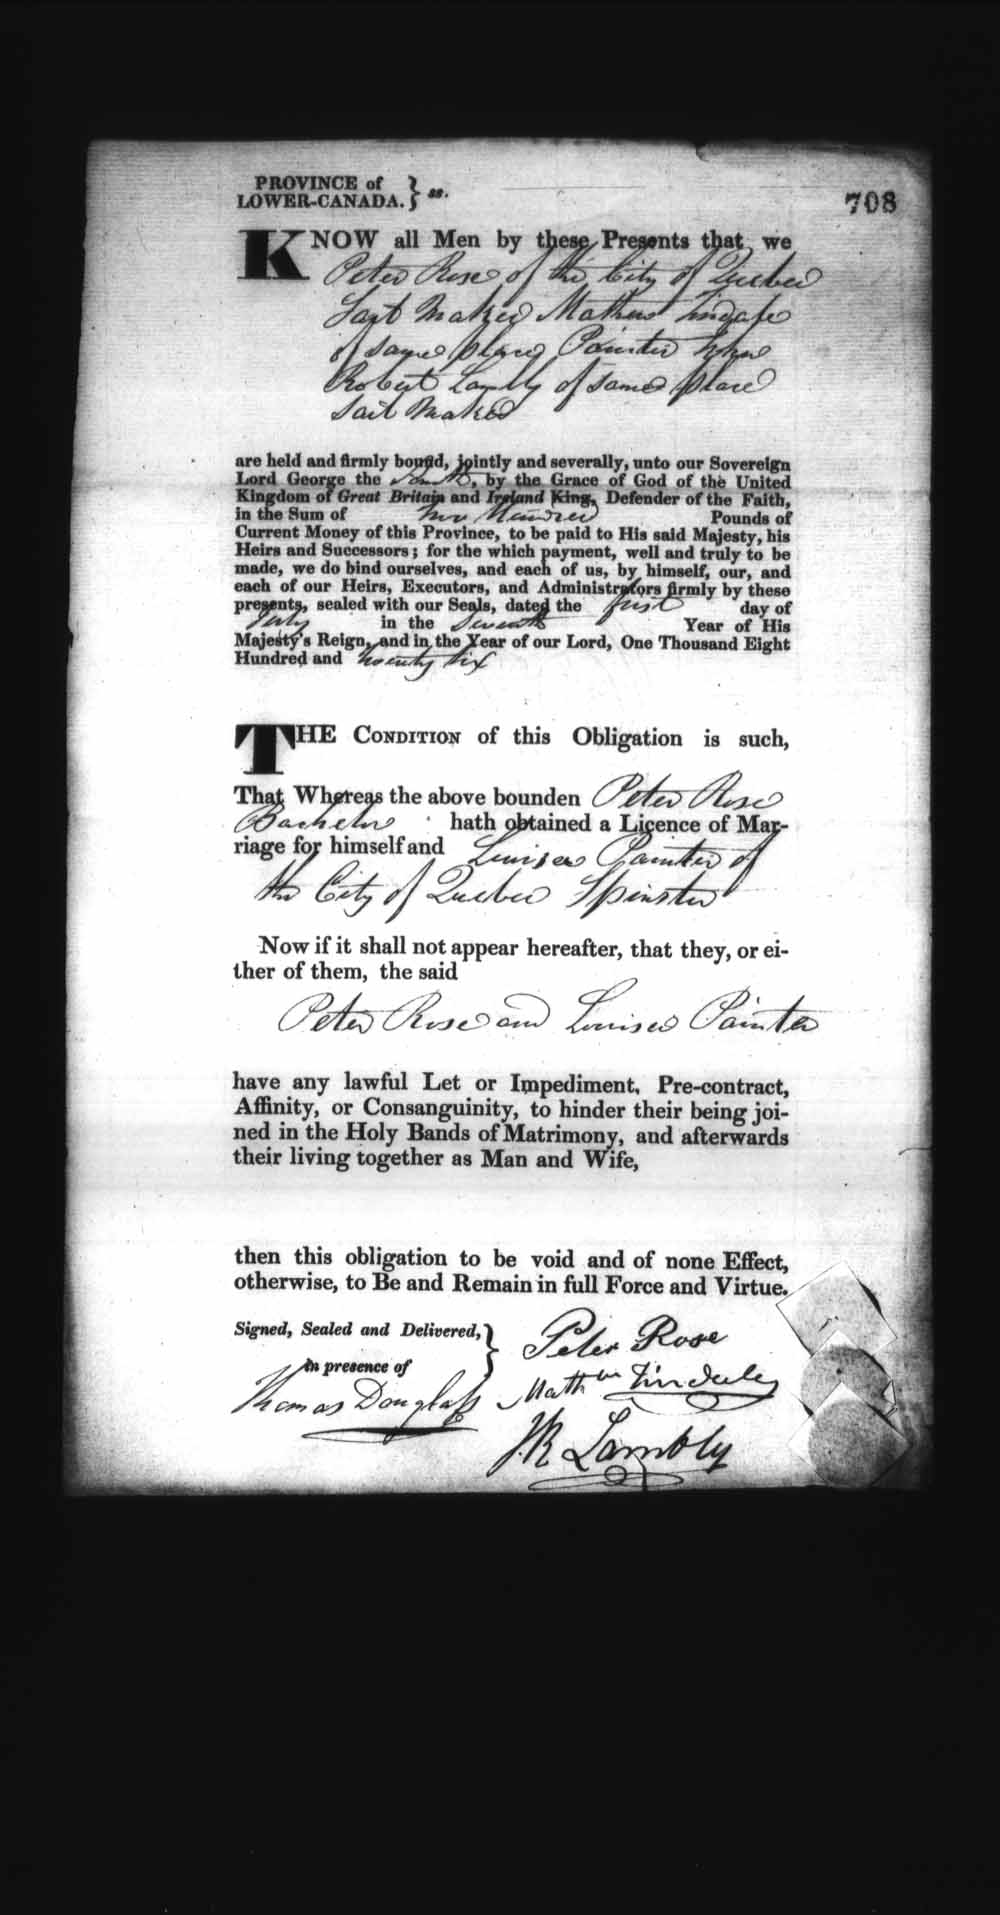 Digitized page of Upper and Lower Canada Marriage Bonds (1779-1865) for Image No.: e008236763